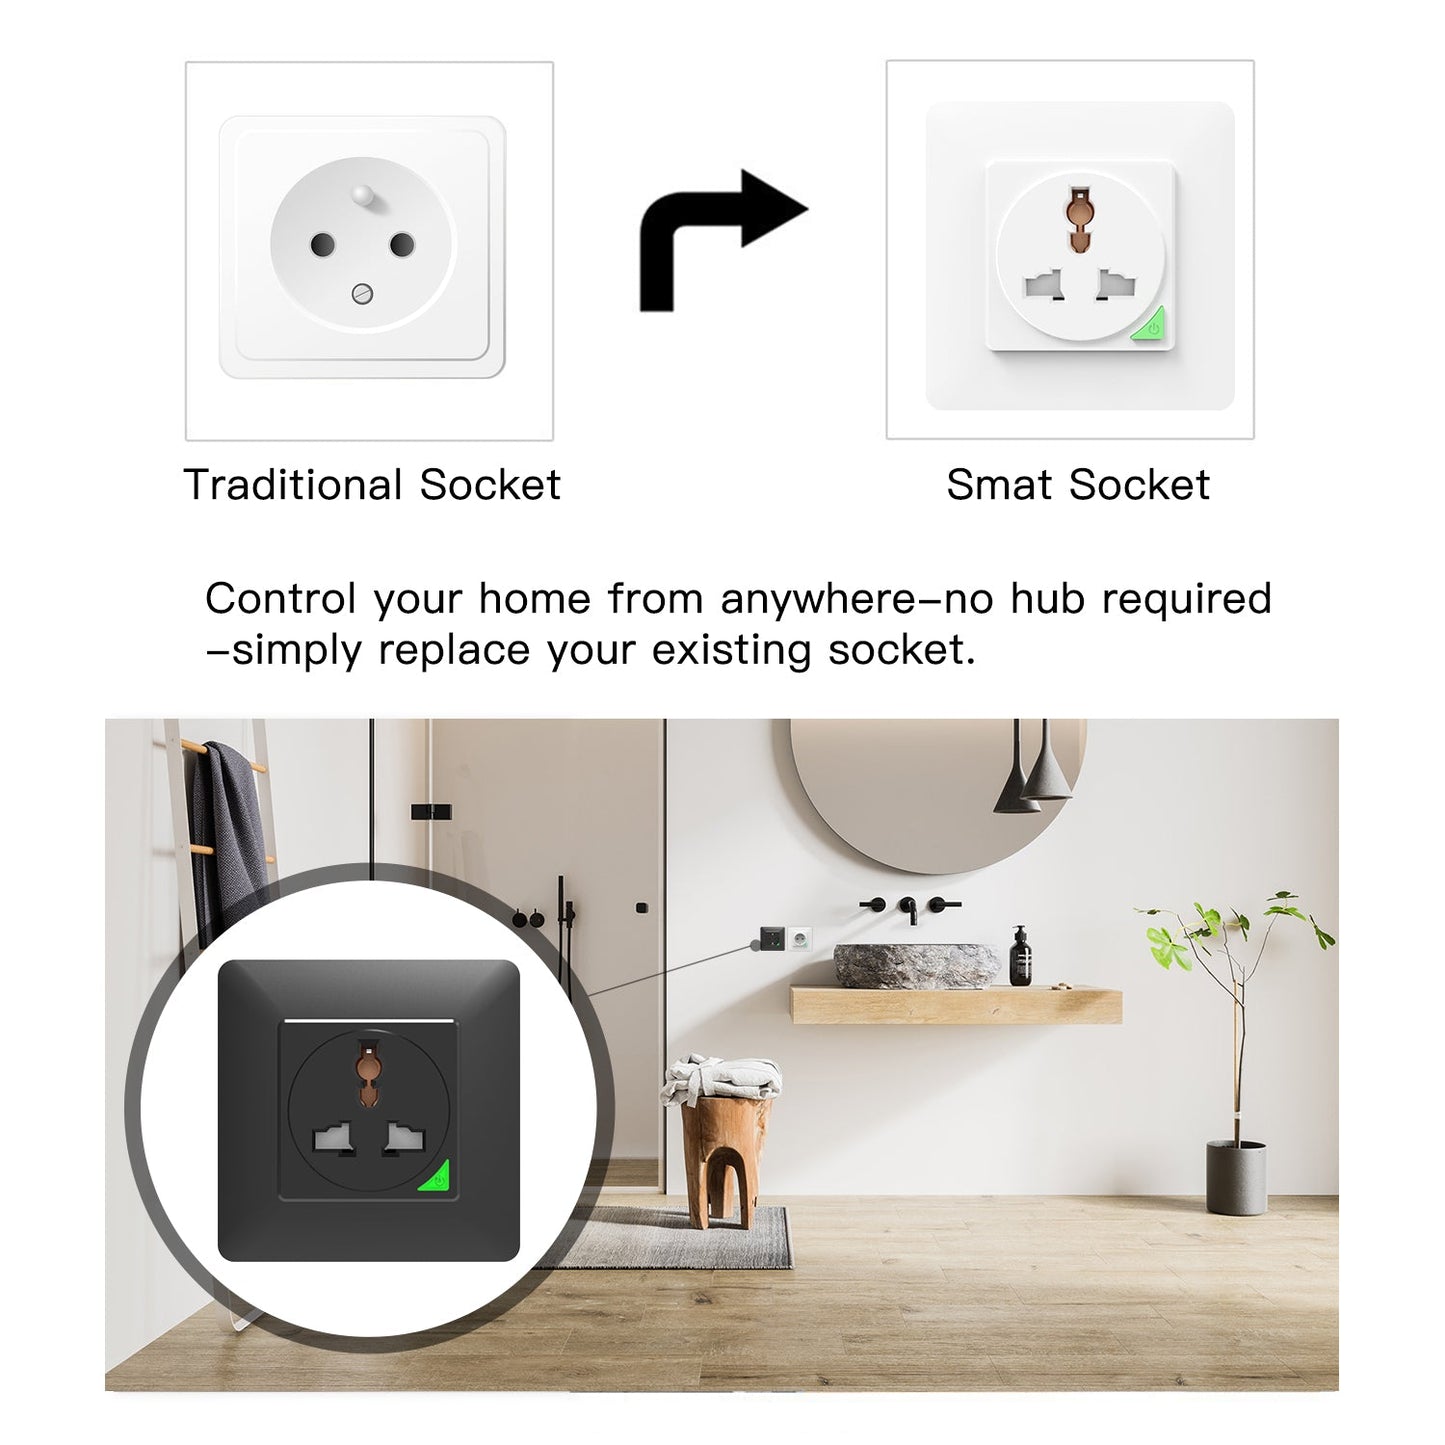 WiFi Smart Light Wall Switch Socket Outlet Push Button UN Version - Moes